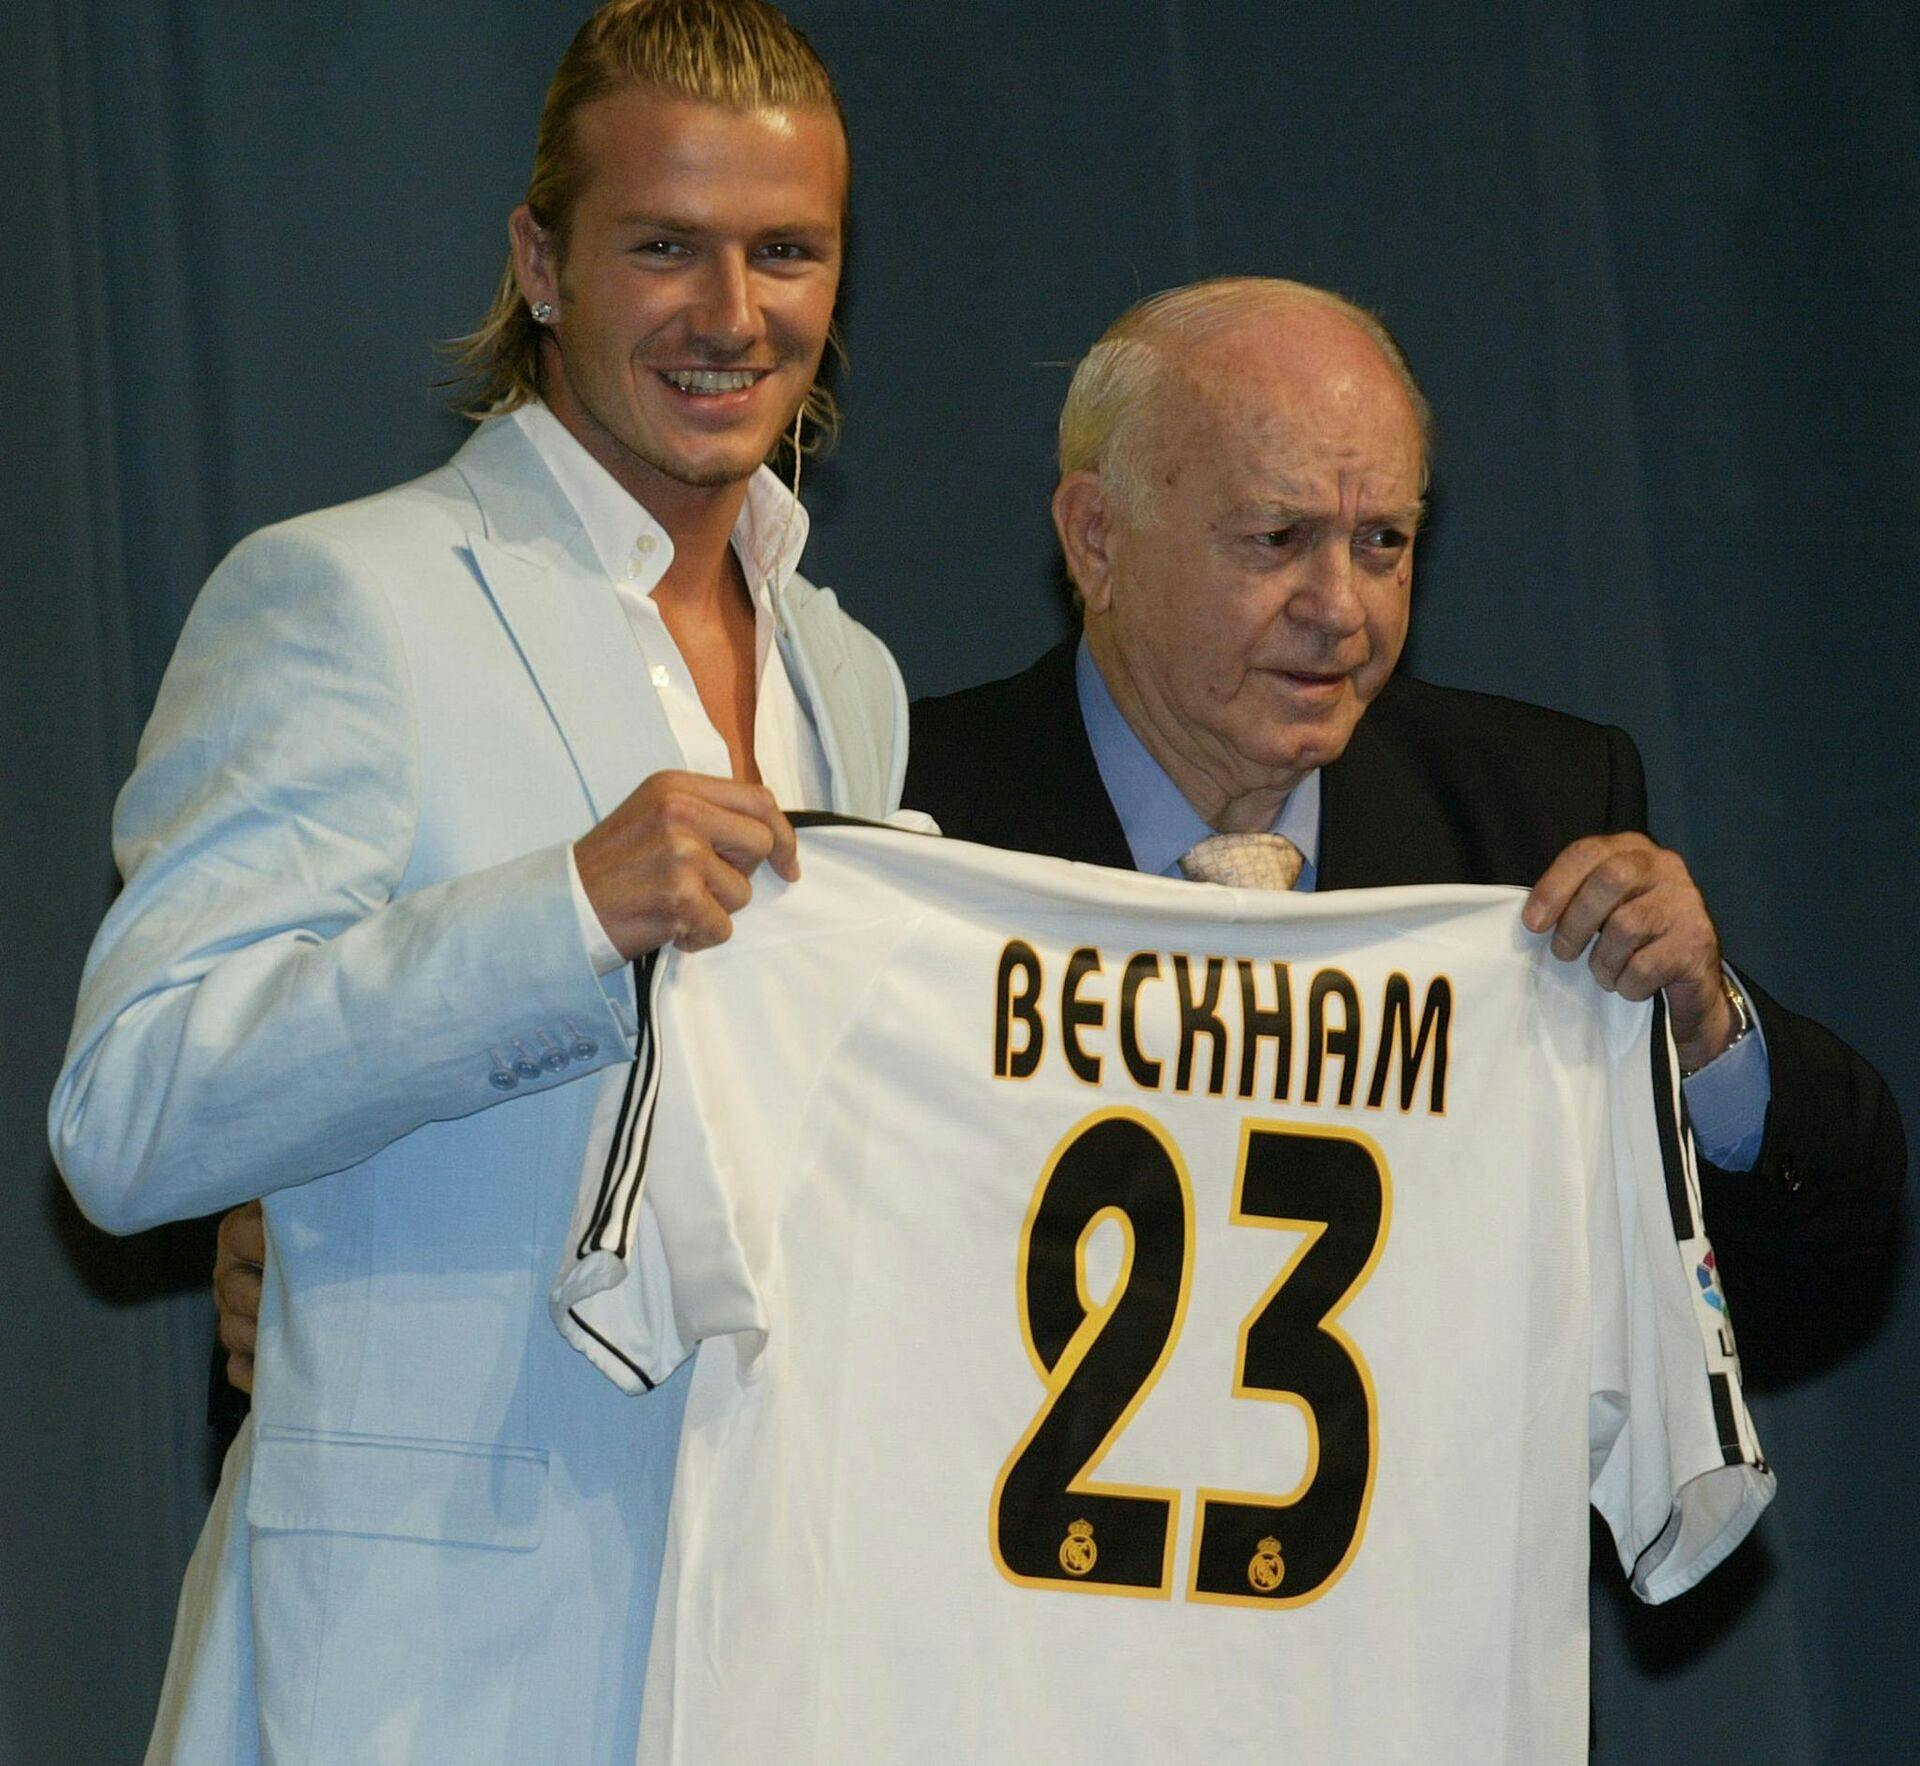 (FILES) In a file picture taken July 2, 2003 Argentinian Alfredo Di Stefano, Real Madrids honorary president, poses with Real Madrids new signing, David Beckham at his official presentation at Sport city, Madrid. Football megastar David Beckham announced on May 16, 2013 that he is to retire after a glittering 20-year playing career in which he became one of the most widely recognised figures in world sport. AFP Photo/Christophe SIMON